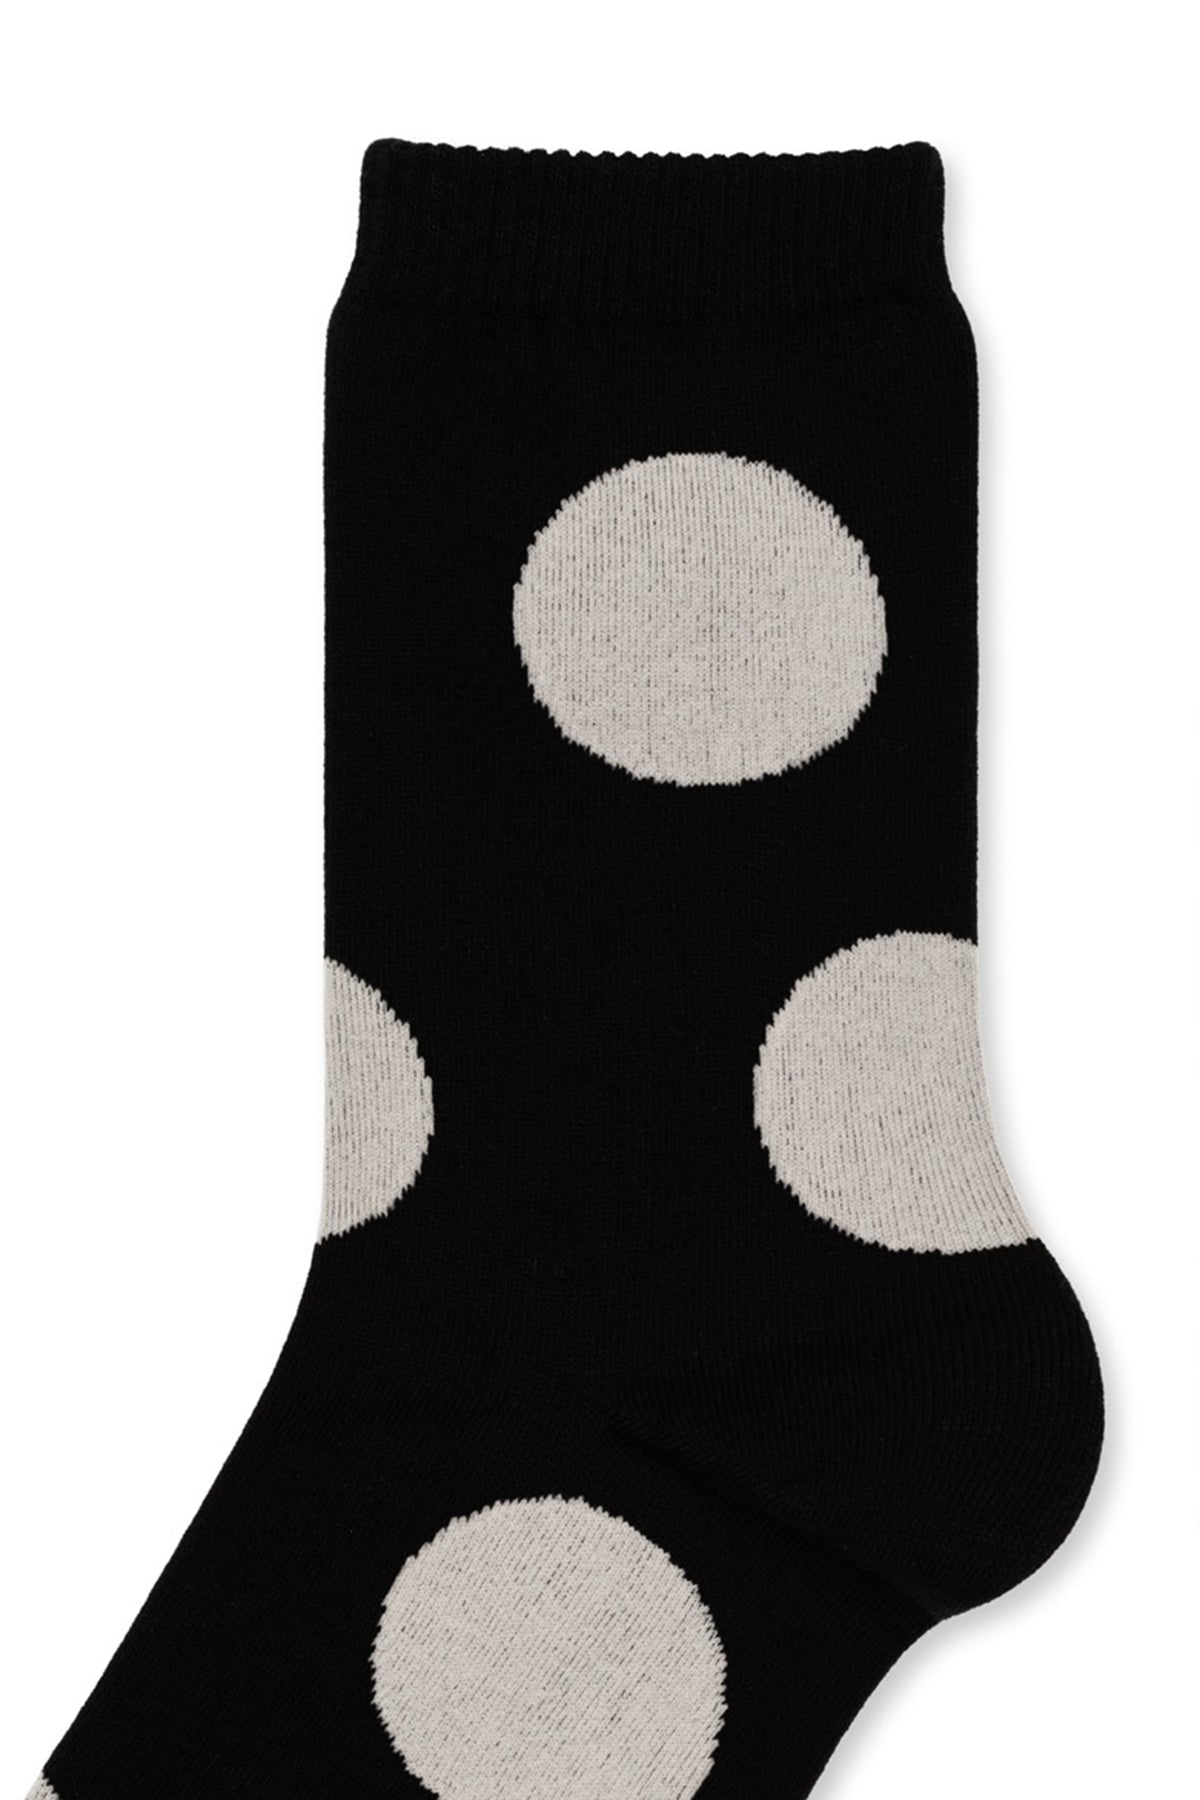   RIE CREW SOCK BY HANSEL FROM BASEL 